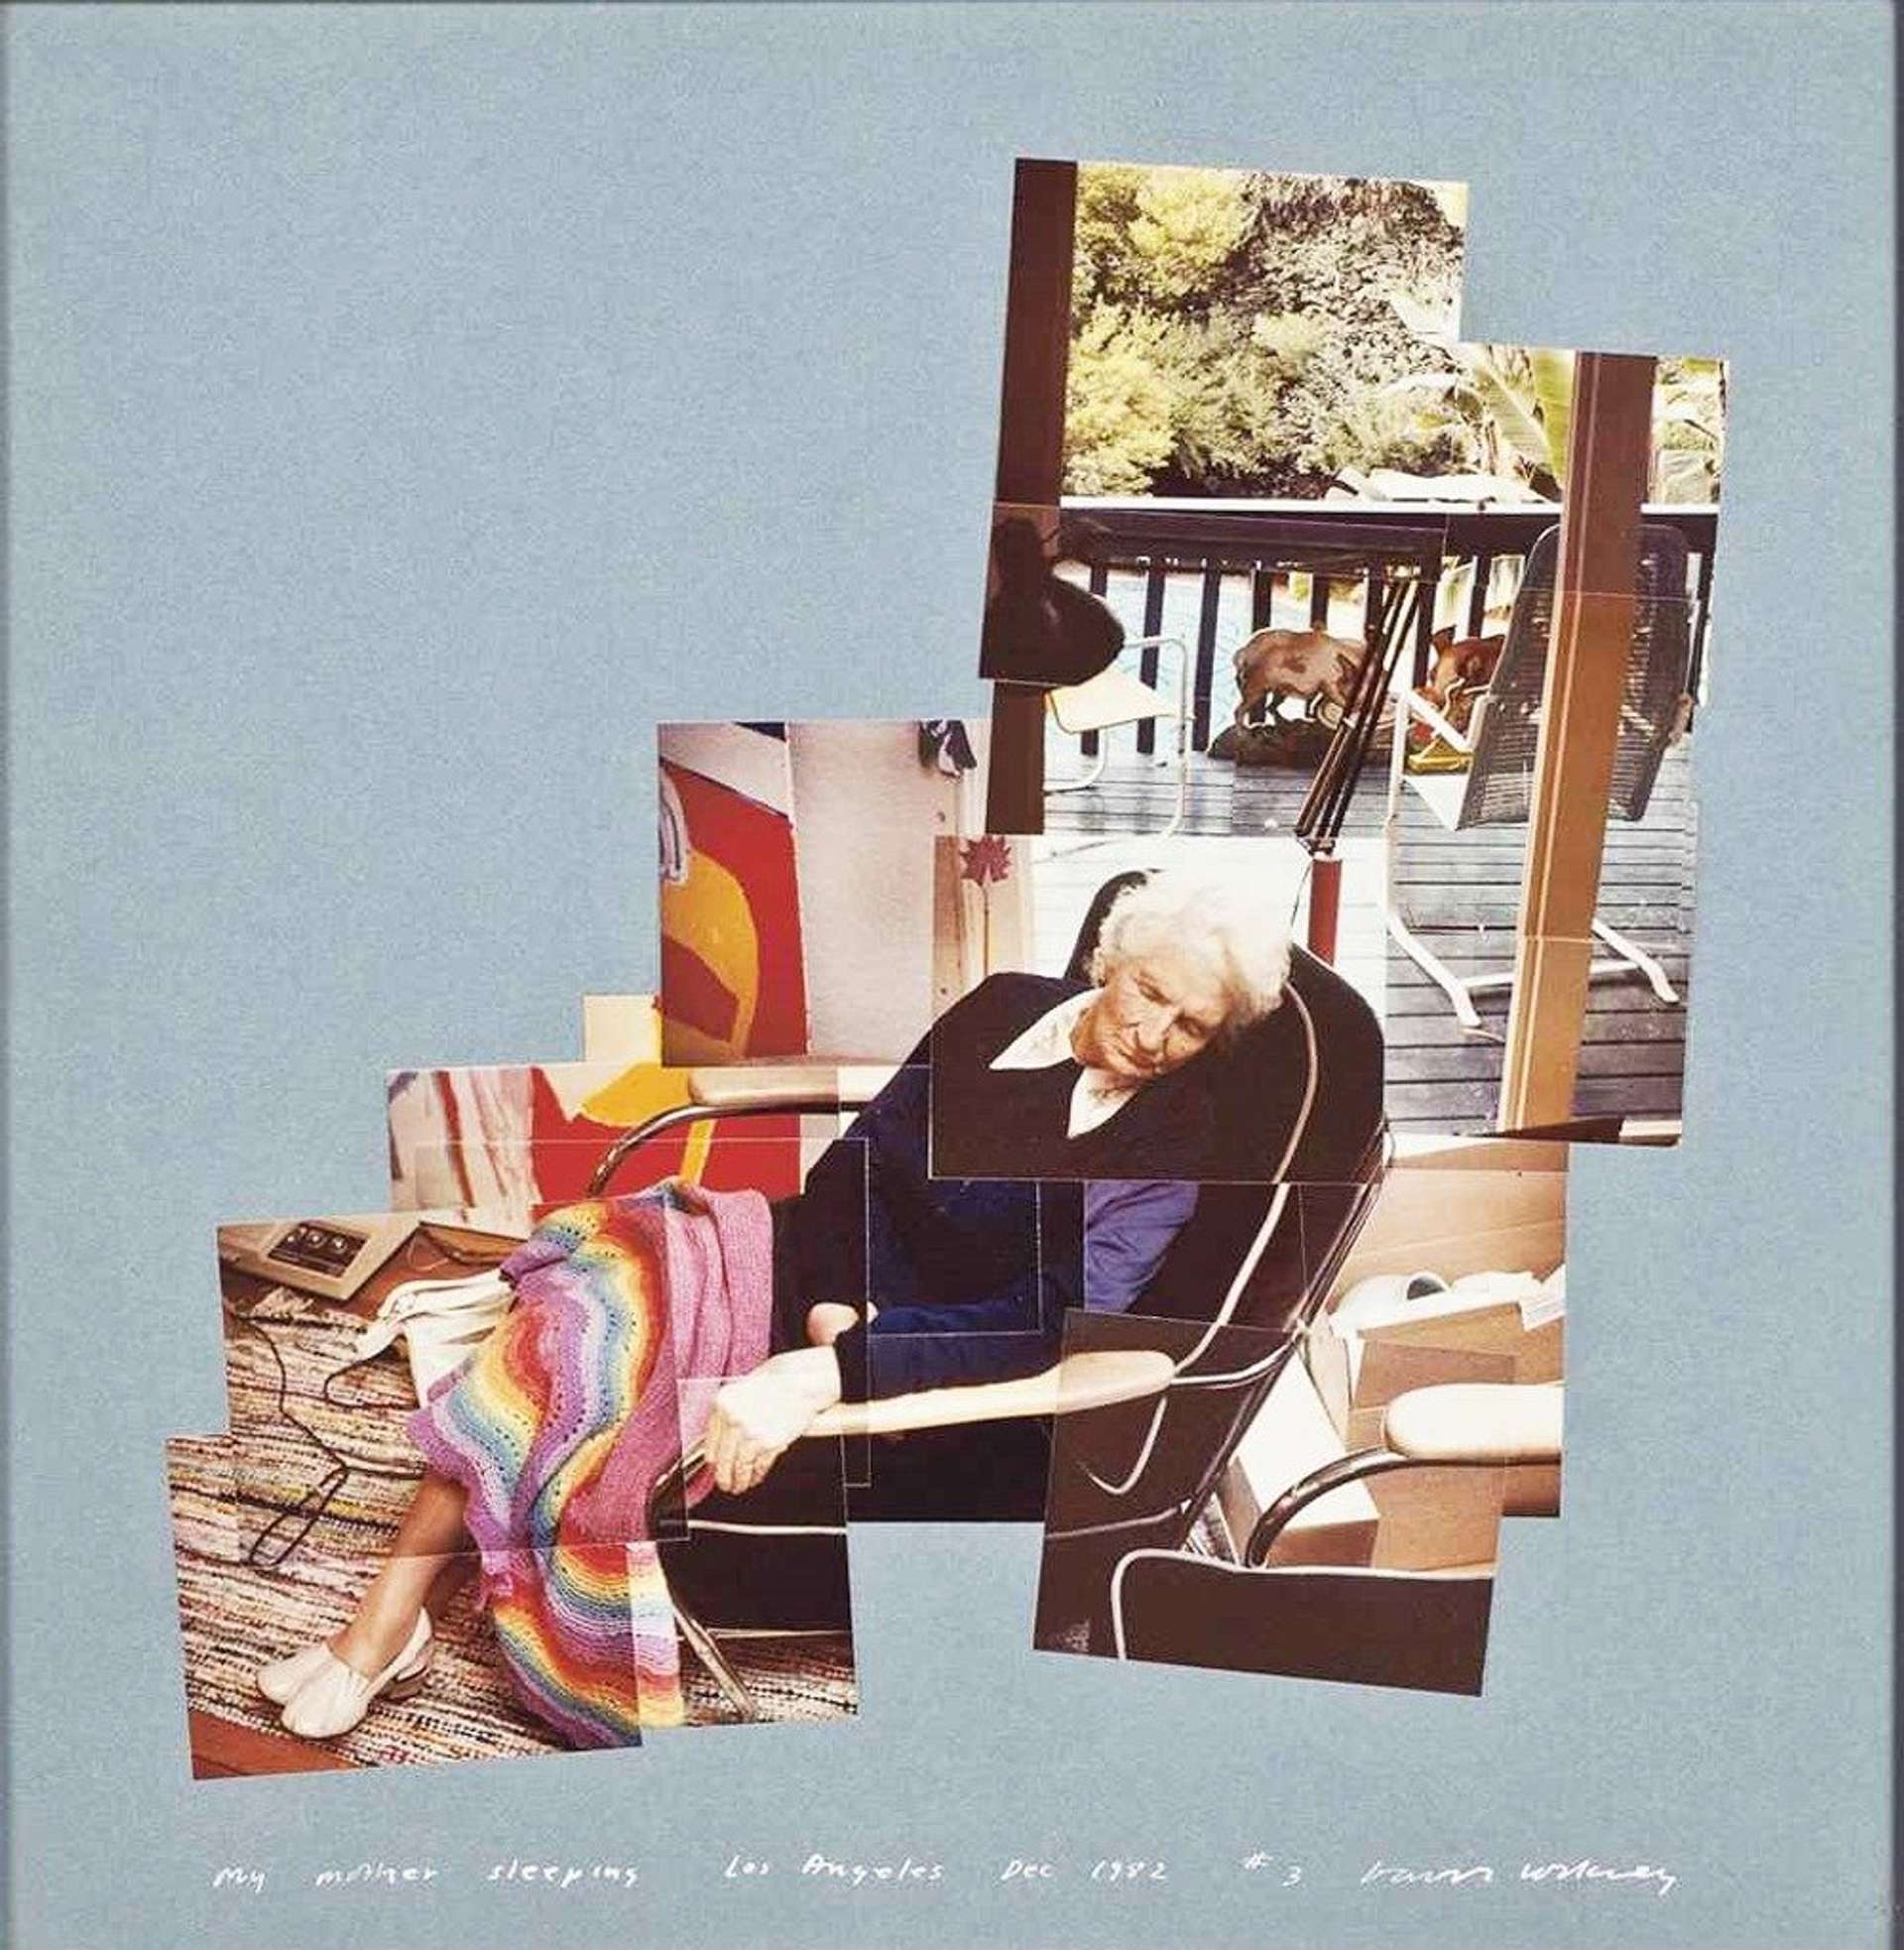 David Hockney’s My Mother Sleeping, Los Angeles. A photographic print of a collage of images. There is an older woman with white hair sleeping in a black chair with a rainbow patterned blanket over her legs. She is in front of her patio. 